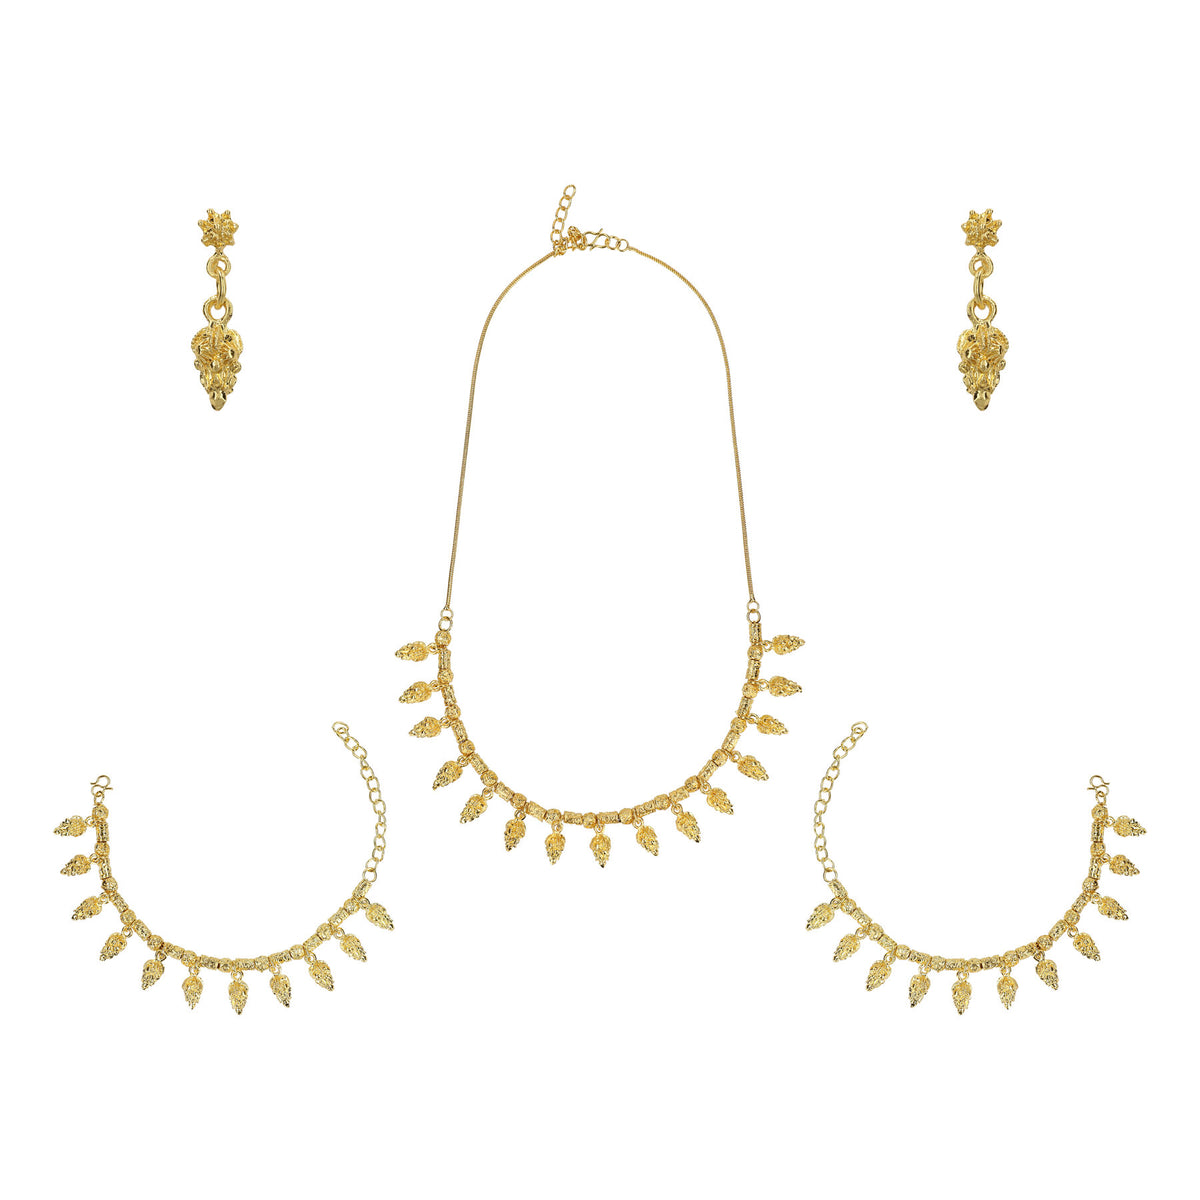 3 in 1, gold traditional Thai necklace, bracelets and earrings set.